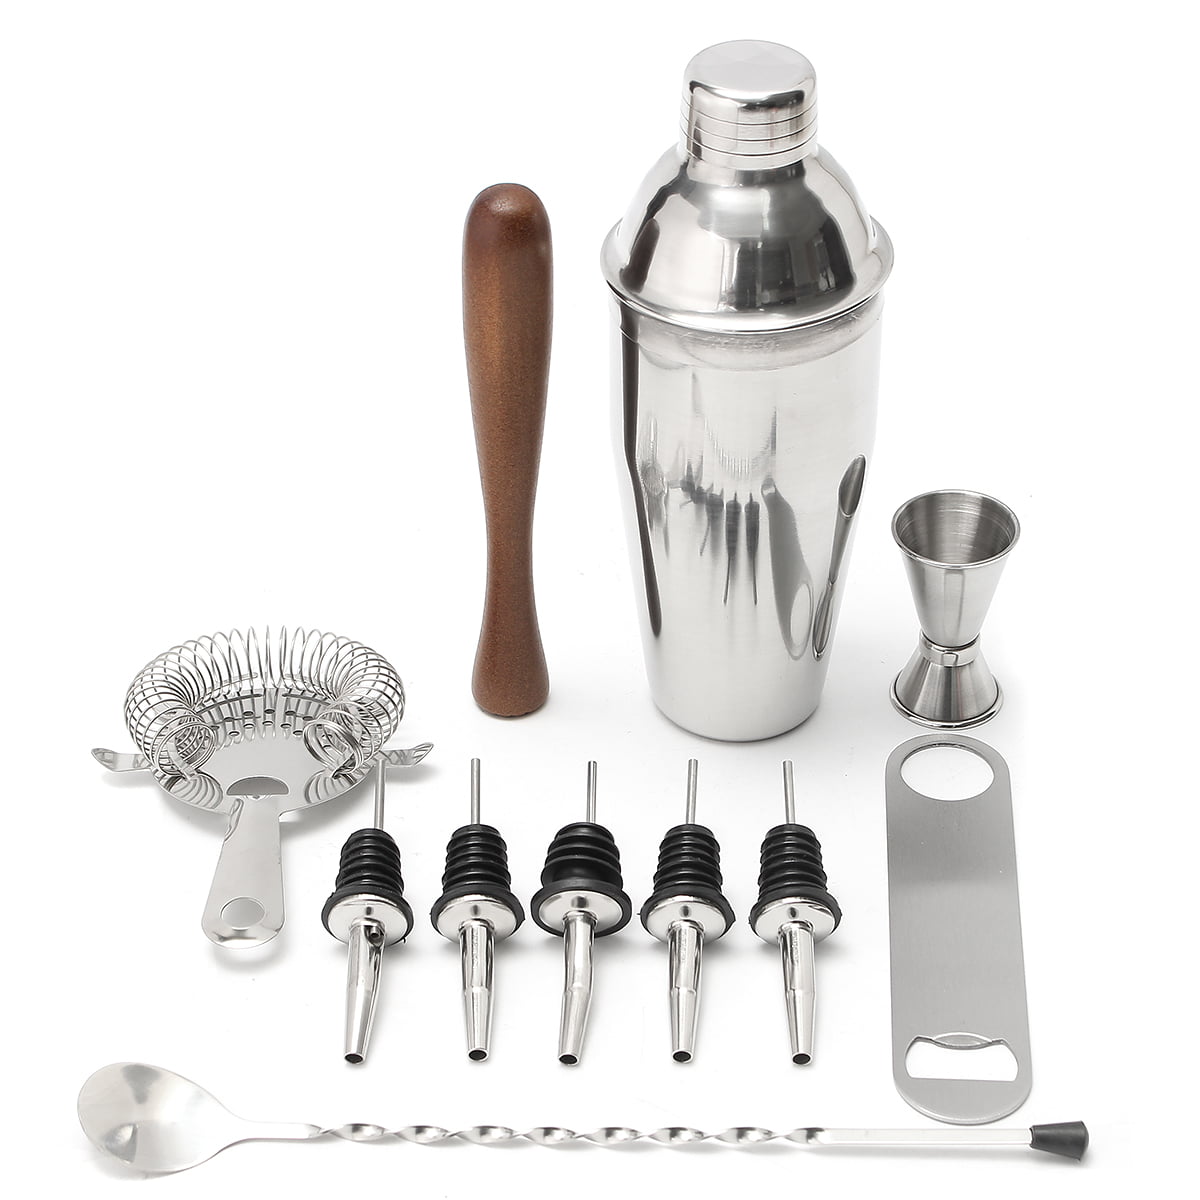 11-Piece Cocktail Shaker Set Duerer Bartender Kit with Stand Strainer Bar Tools: Martini Shaker and More Jigger Bar Tool Set Perfect Drink Mixing Mixer Spoon Best Bartender Kit for Beginners